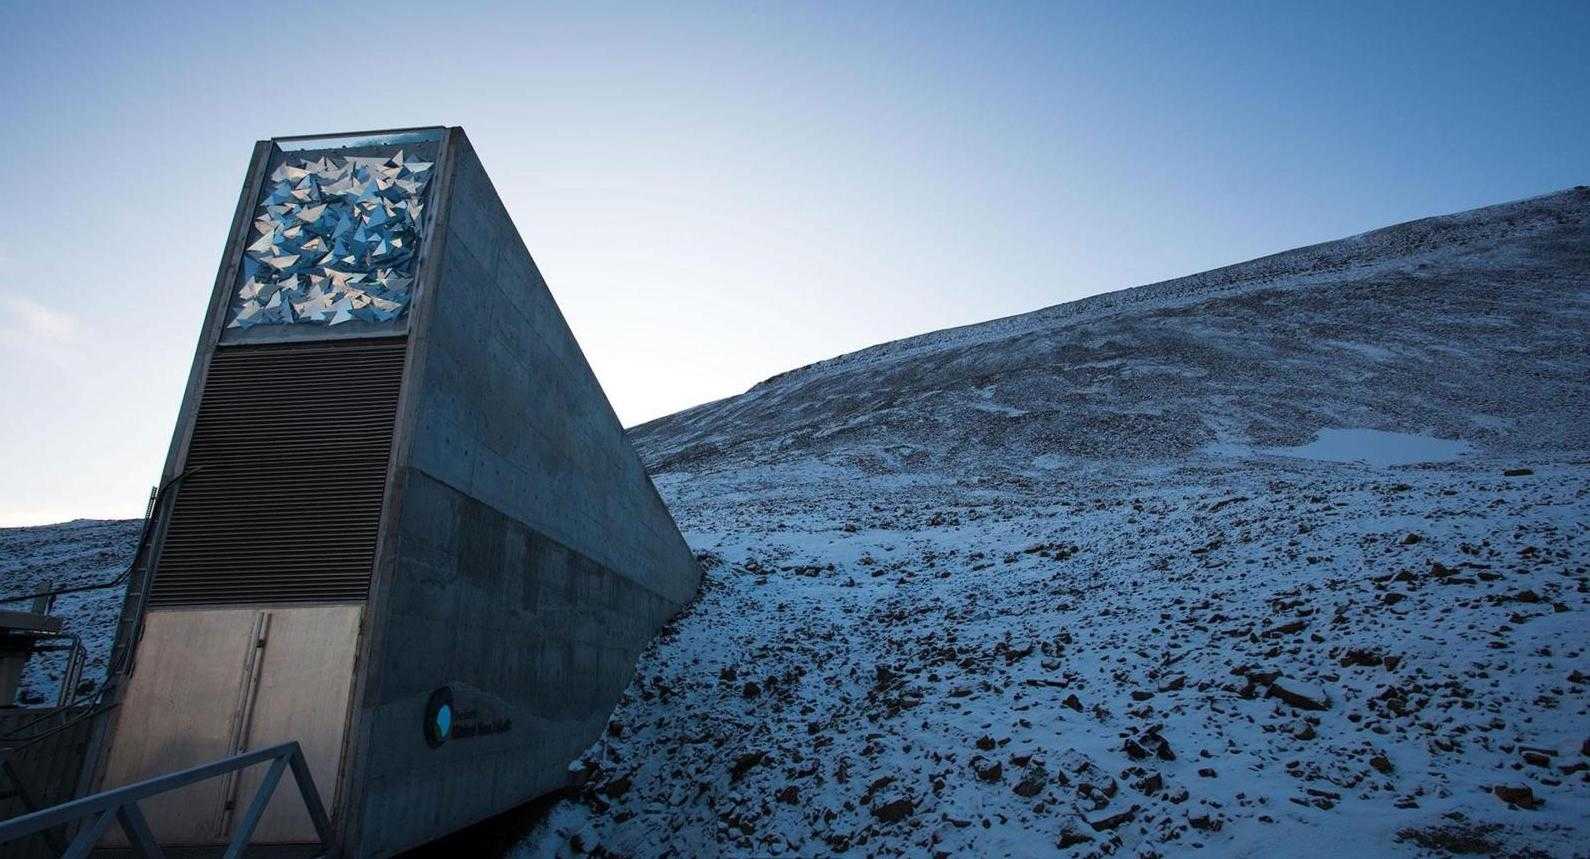 Entrance to the Global Seed Vault in Svalbard, Norway